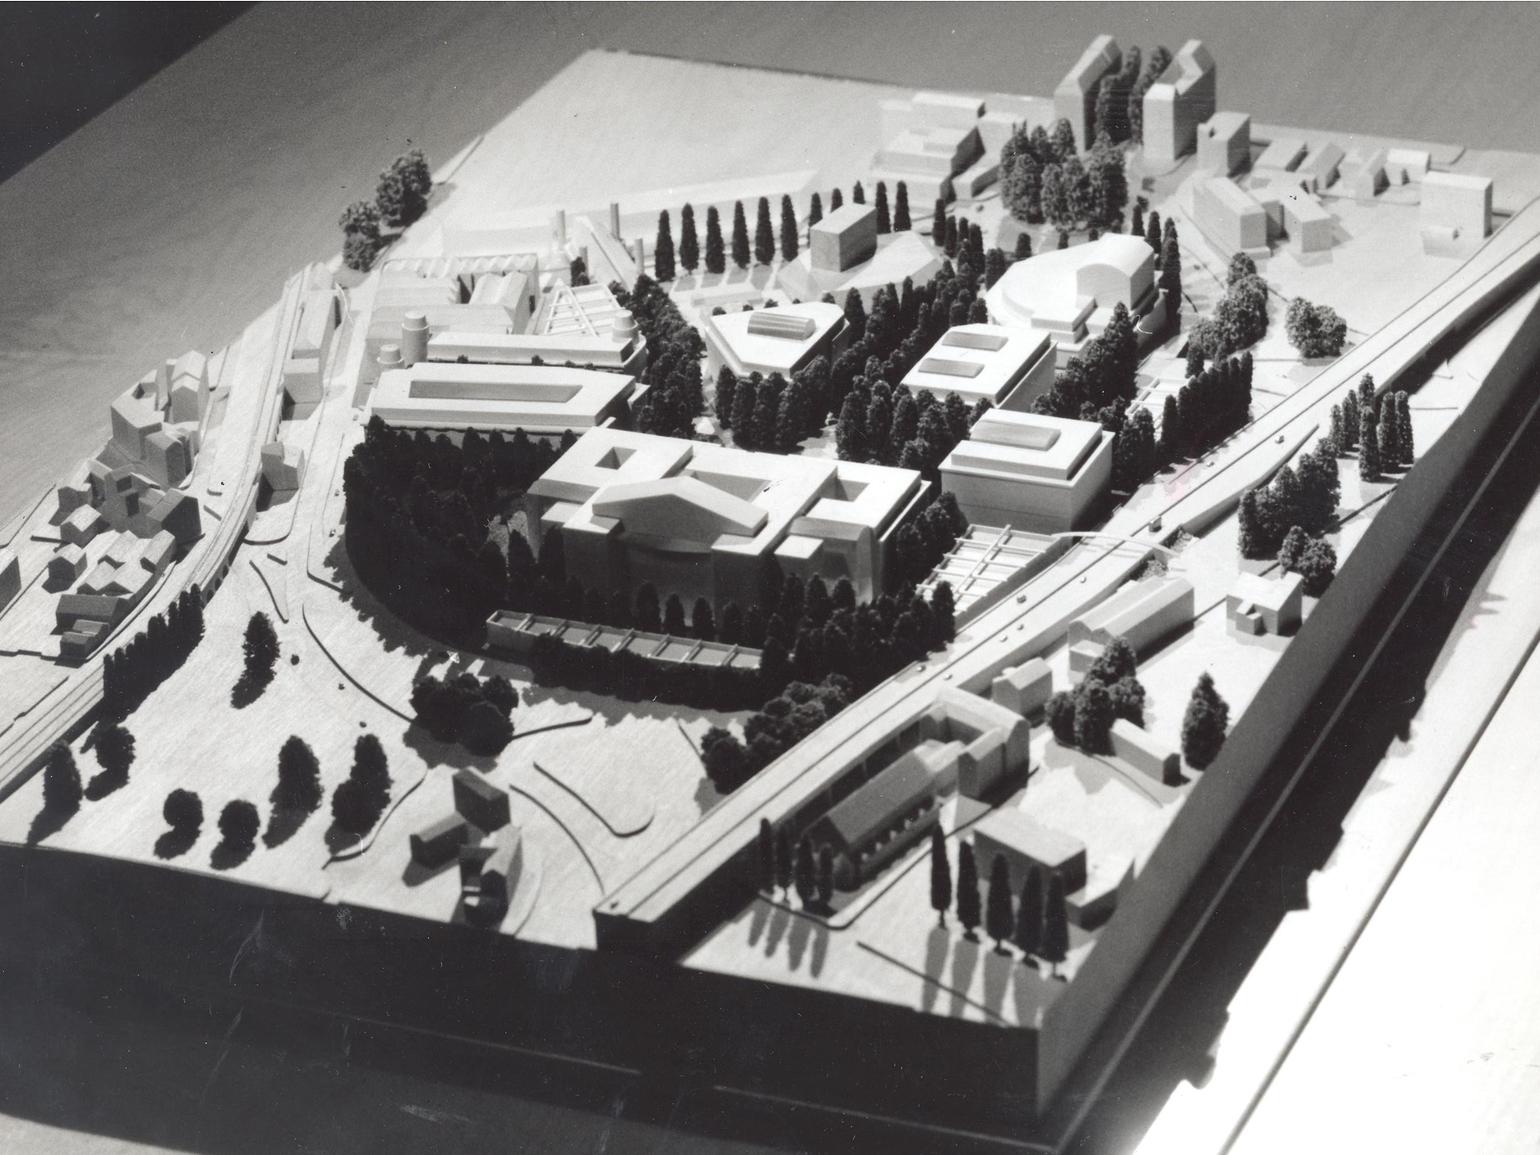 A model from February 1990 of how the finished building would look.